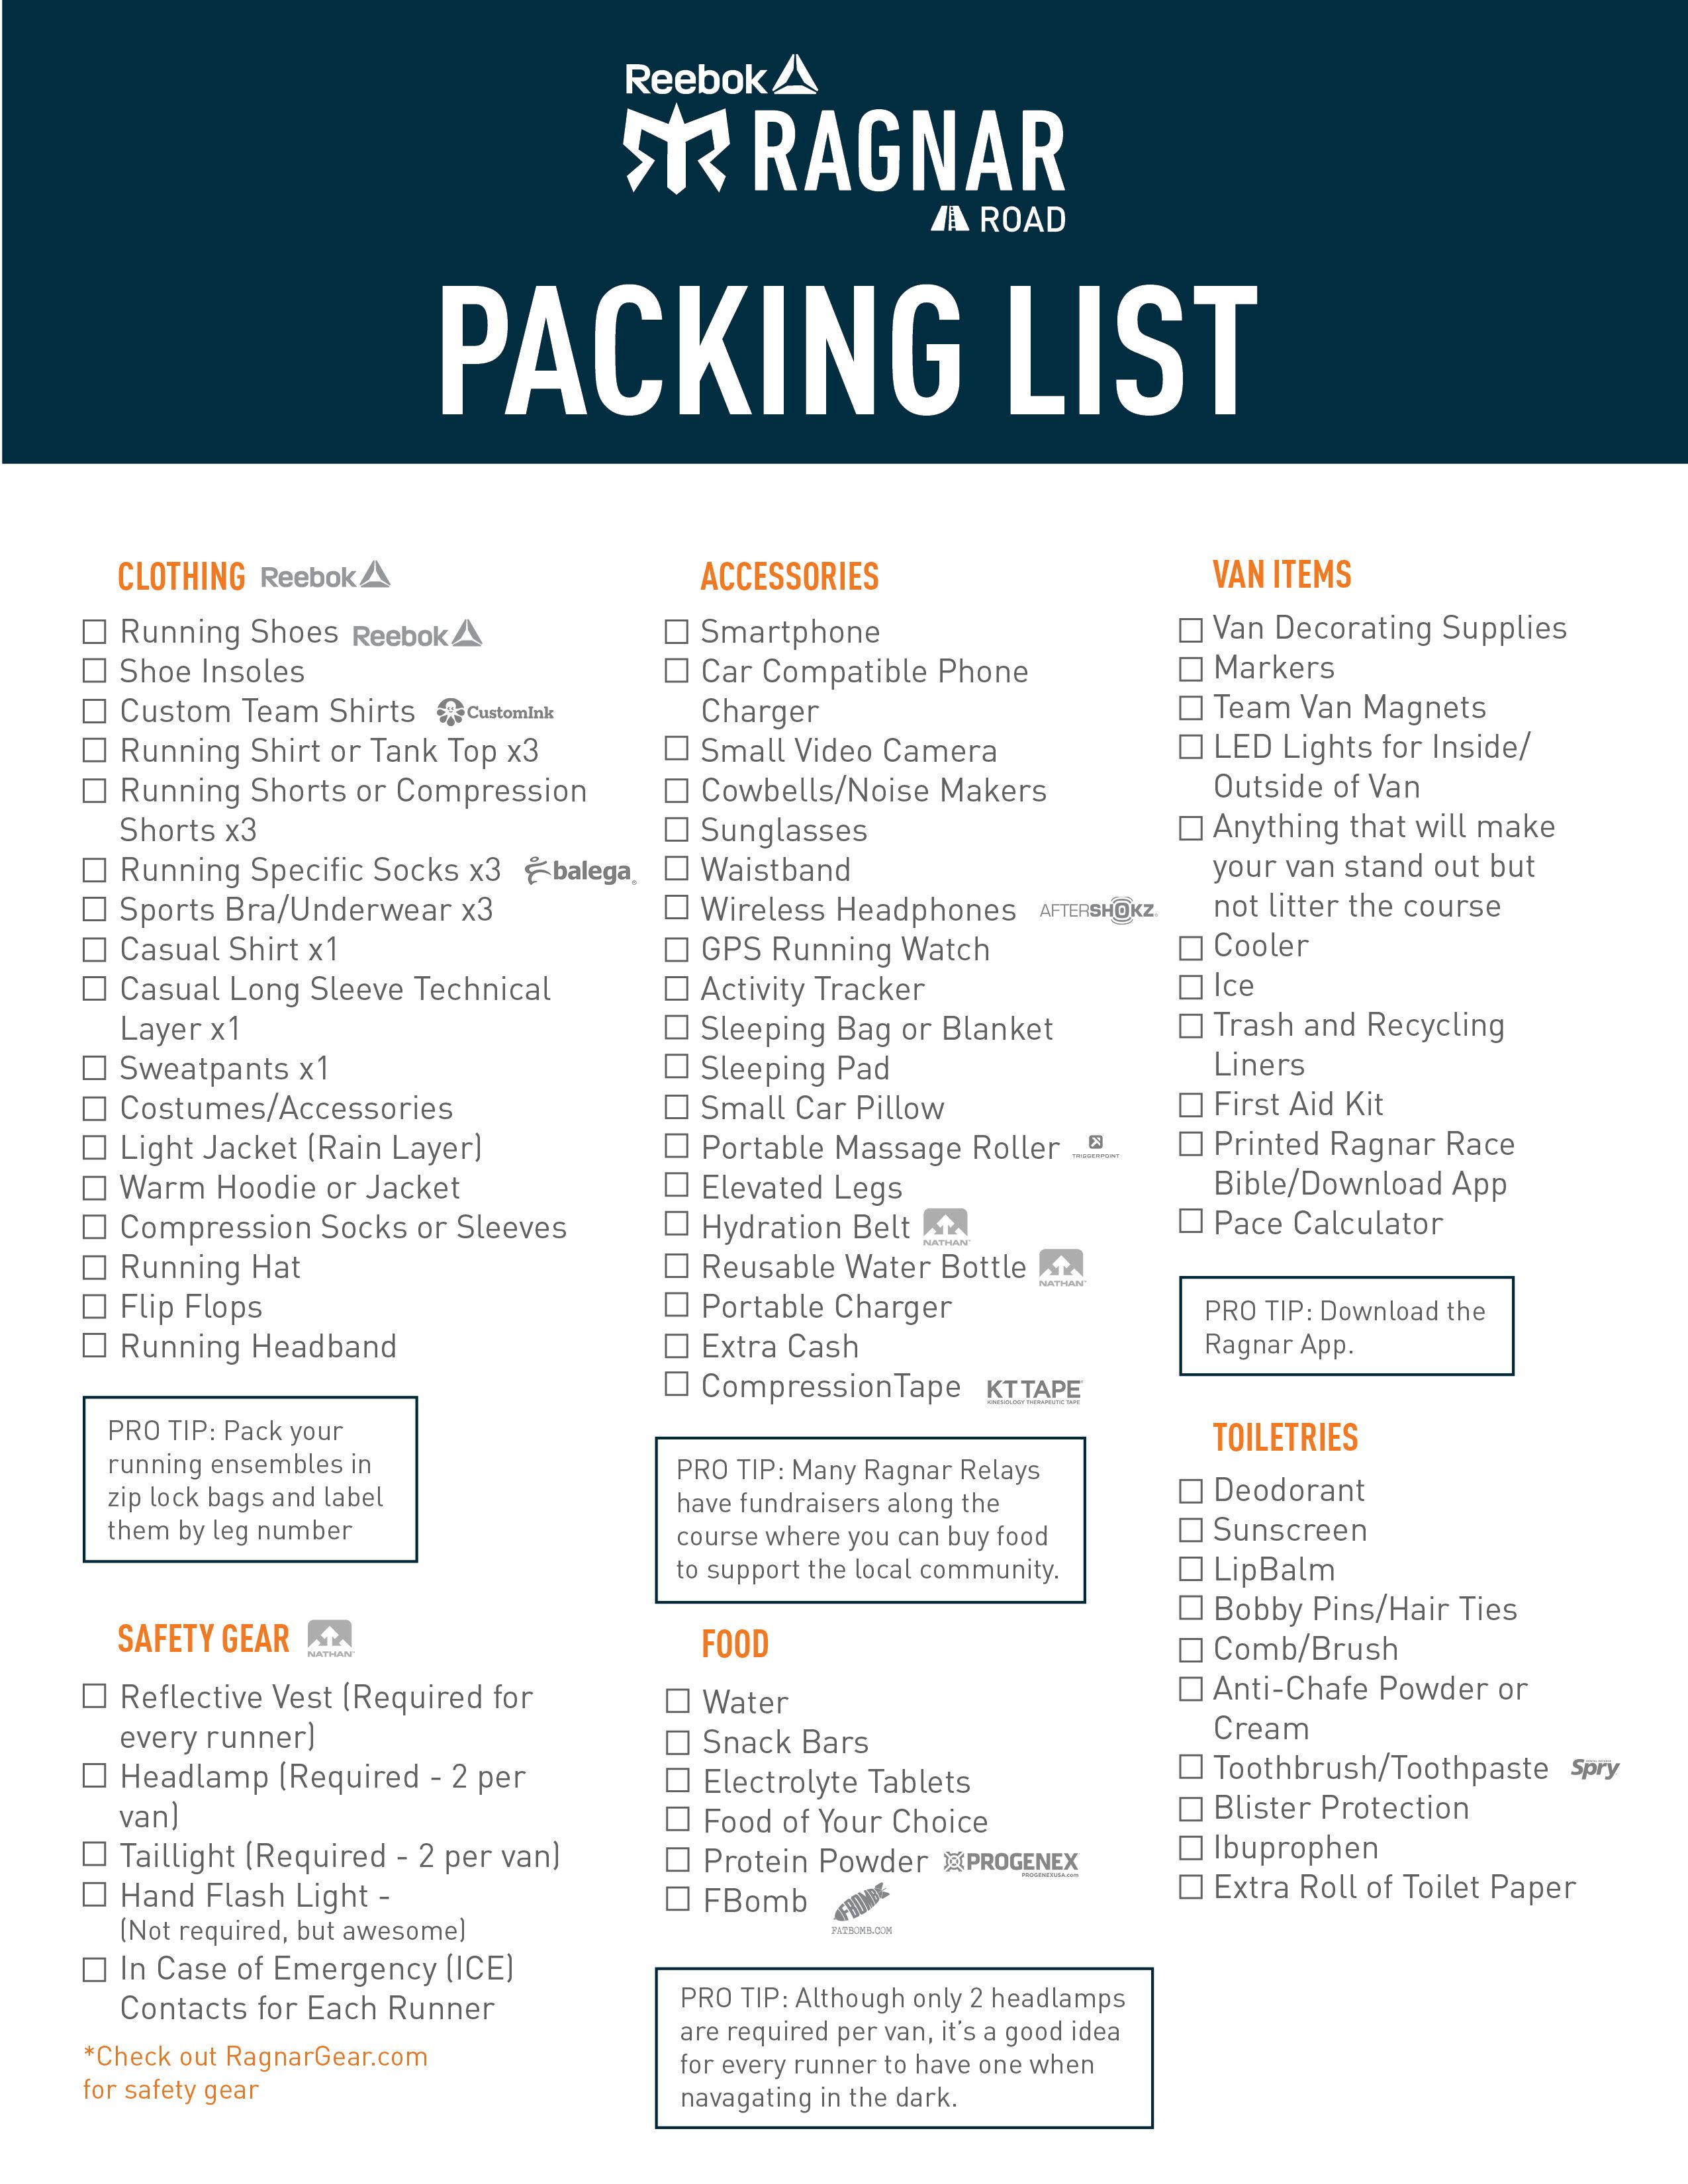 Truck driver packing list: 54 must-have items on the road